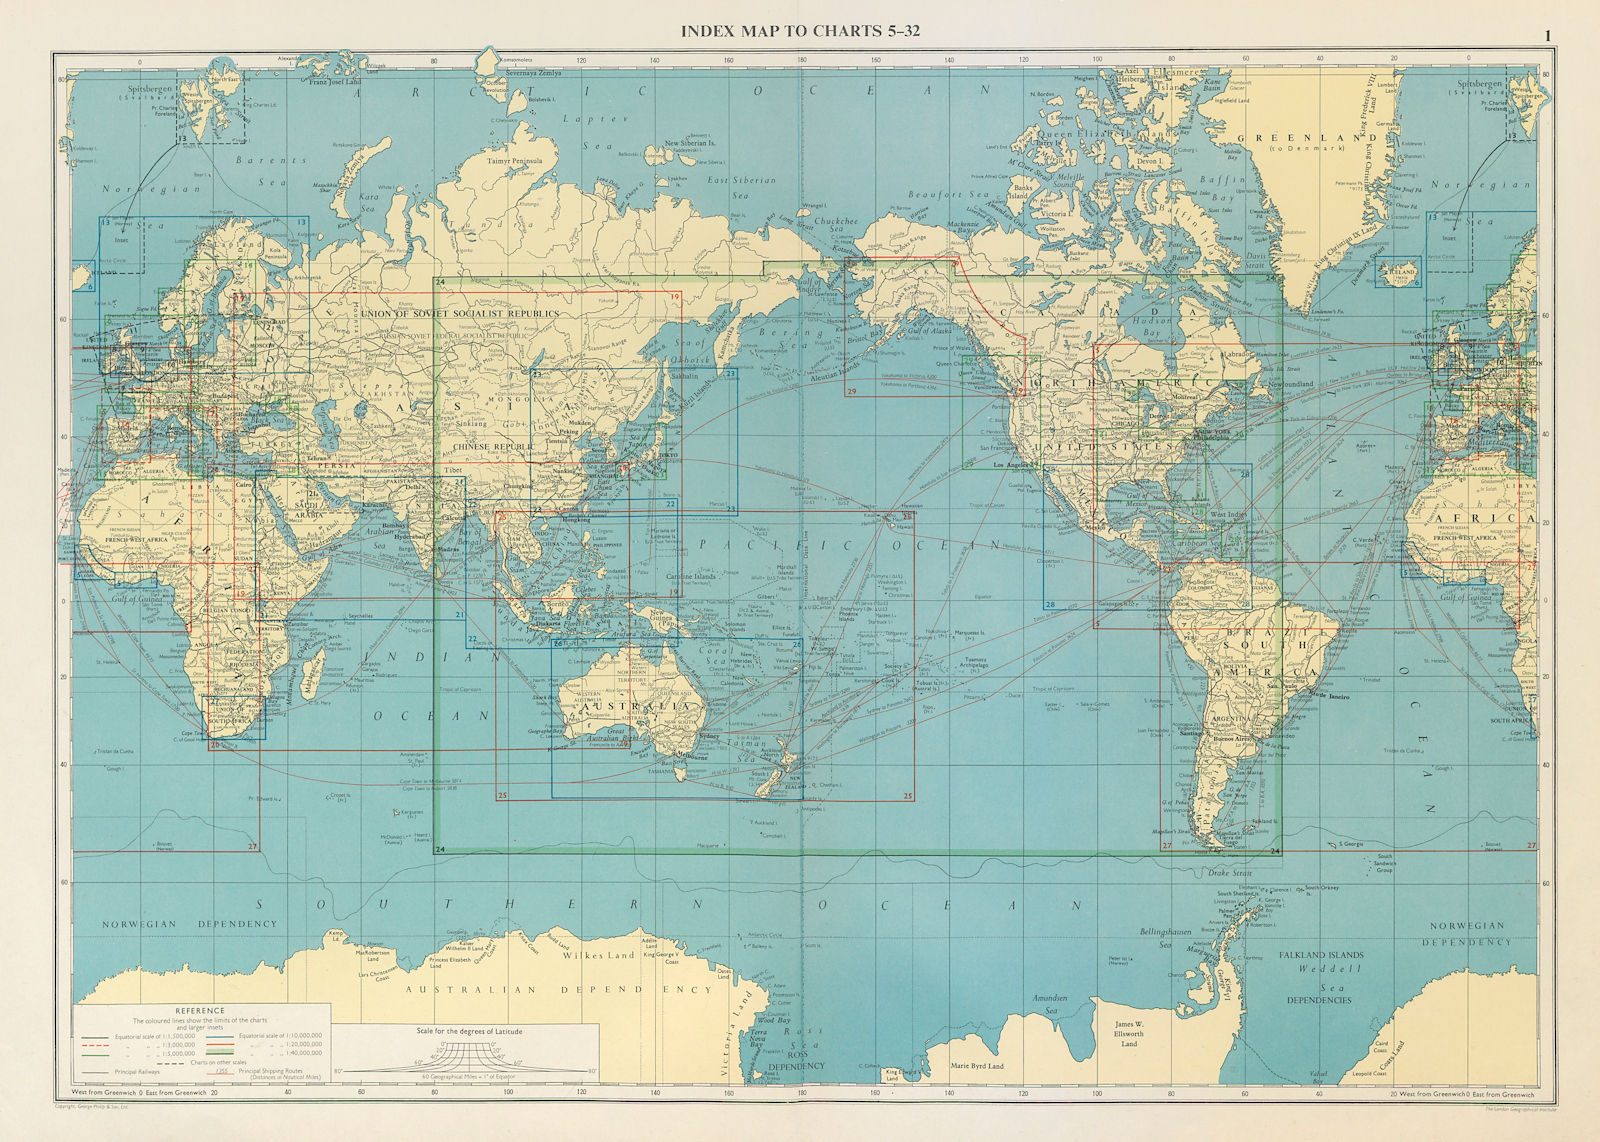 WORLD. Index Map To Charts. World. Large 50x70cm 1959 old vintage